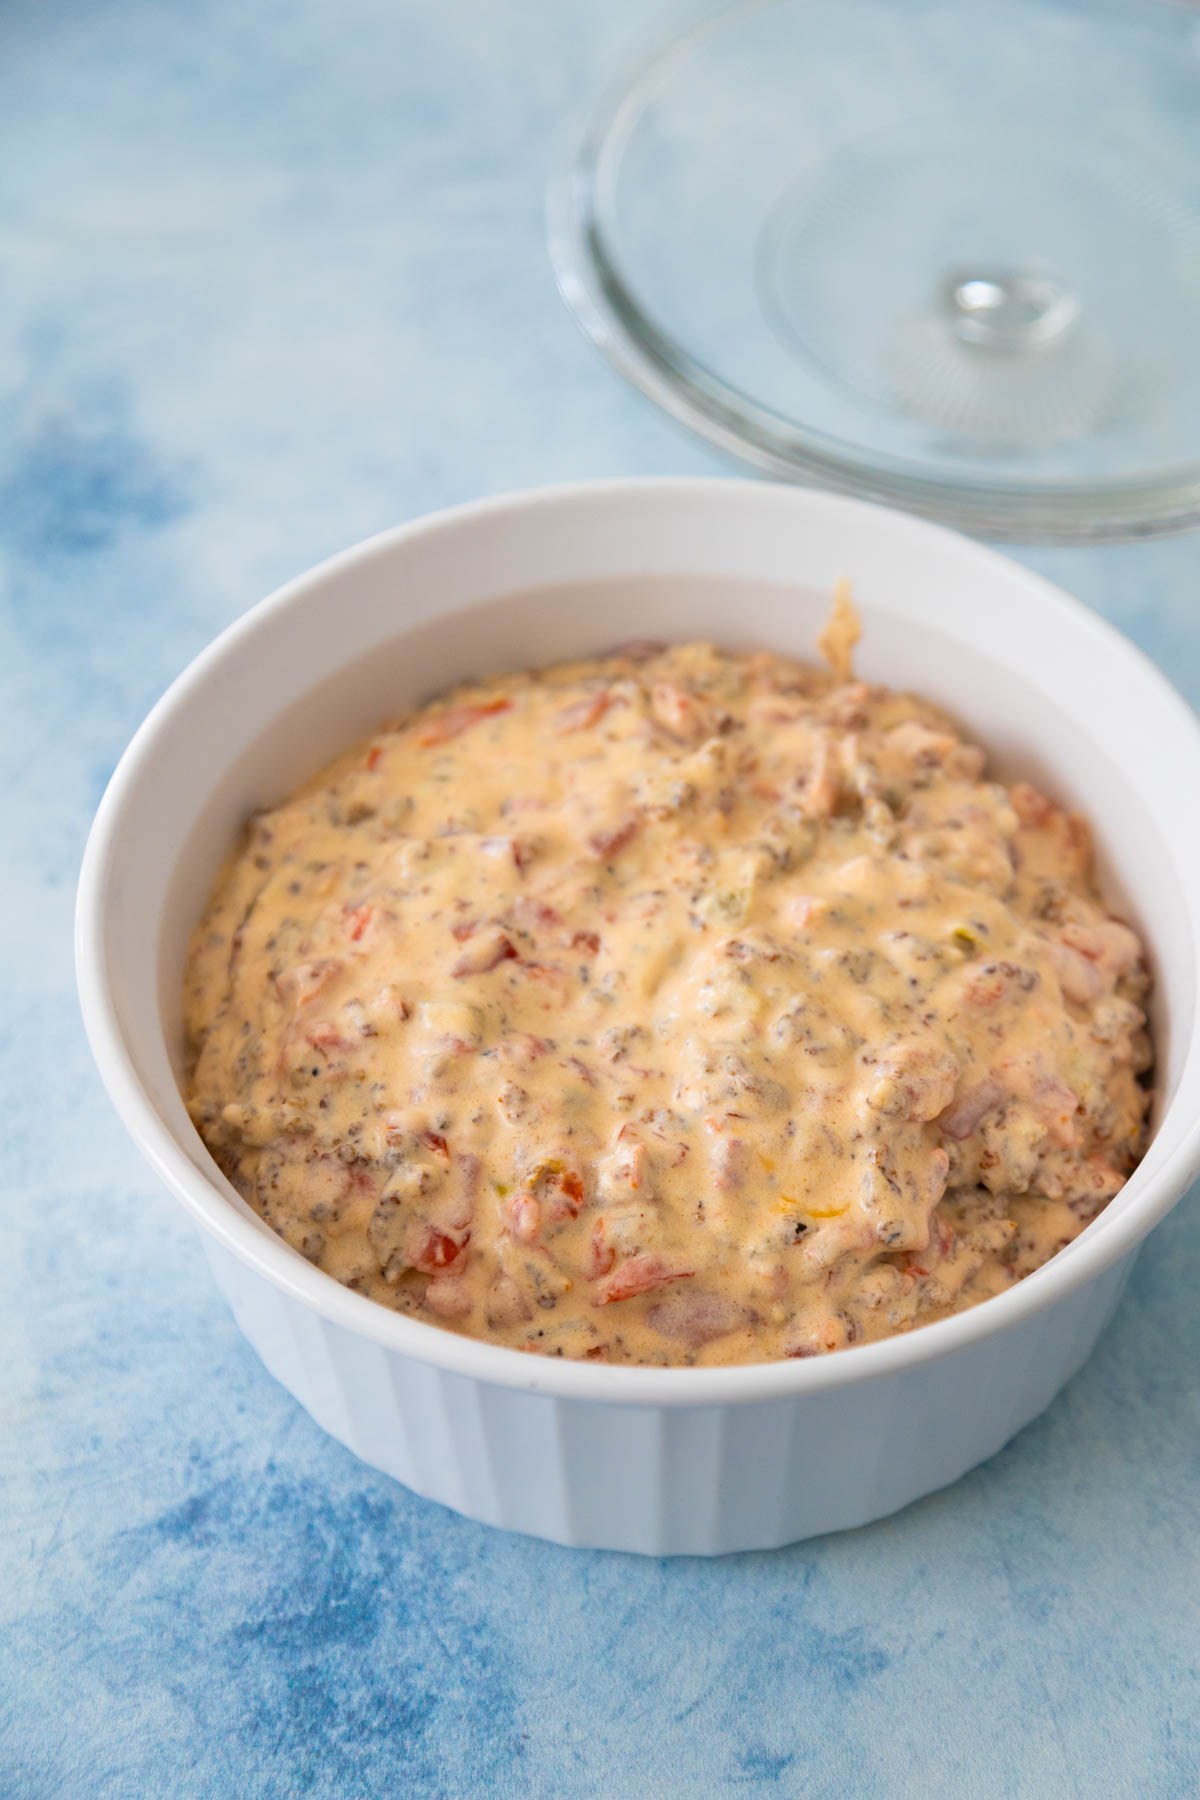 The prepared sausage dip is in a glass casserole dish ready to be refridgerated.